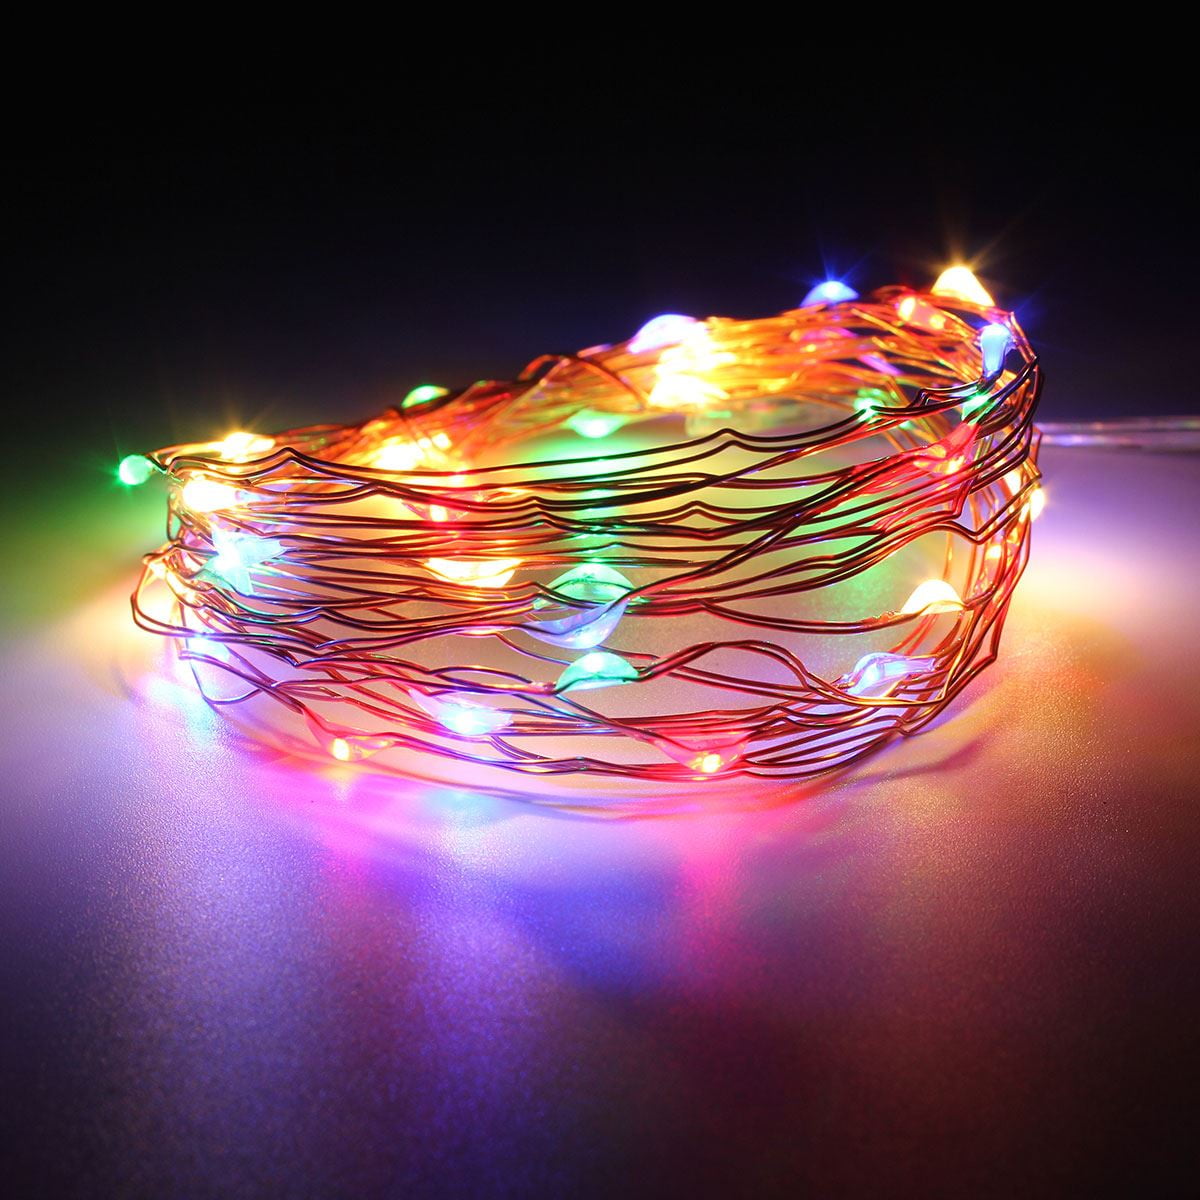 6 PCS LED Fairy String Lights Starry Rope Copper Wire Lights Battery Operated 